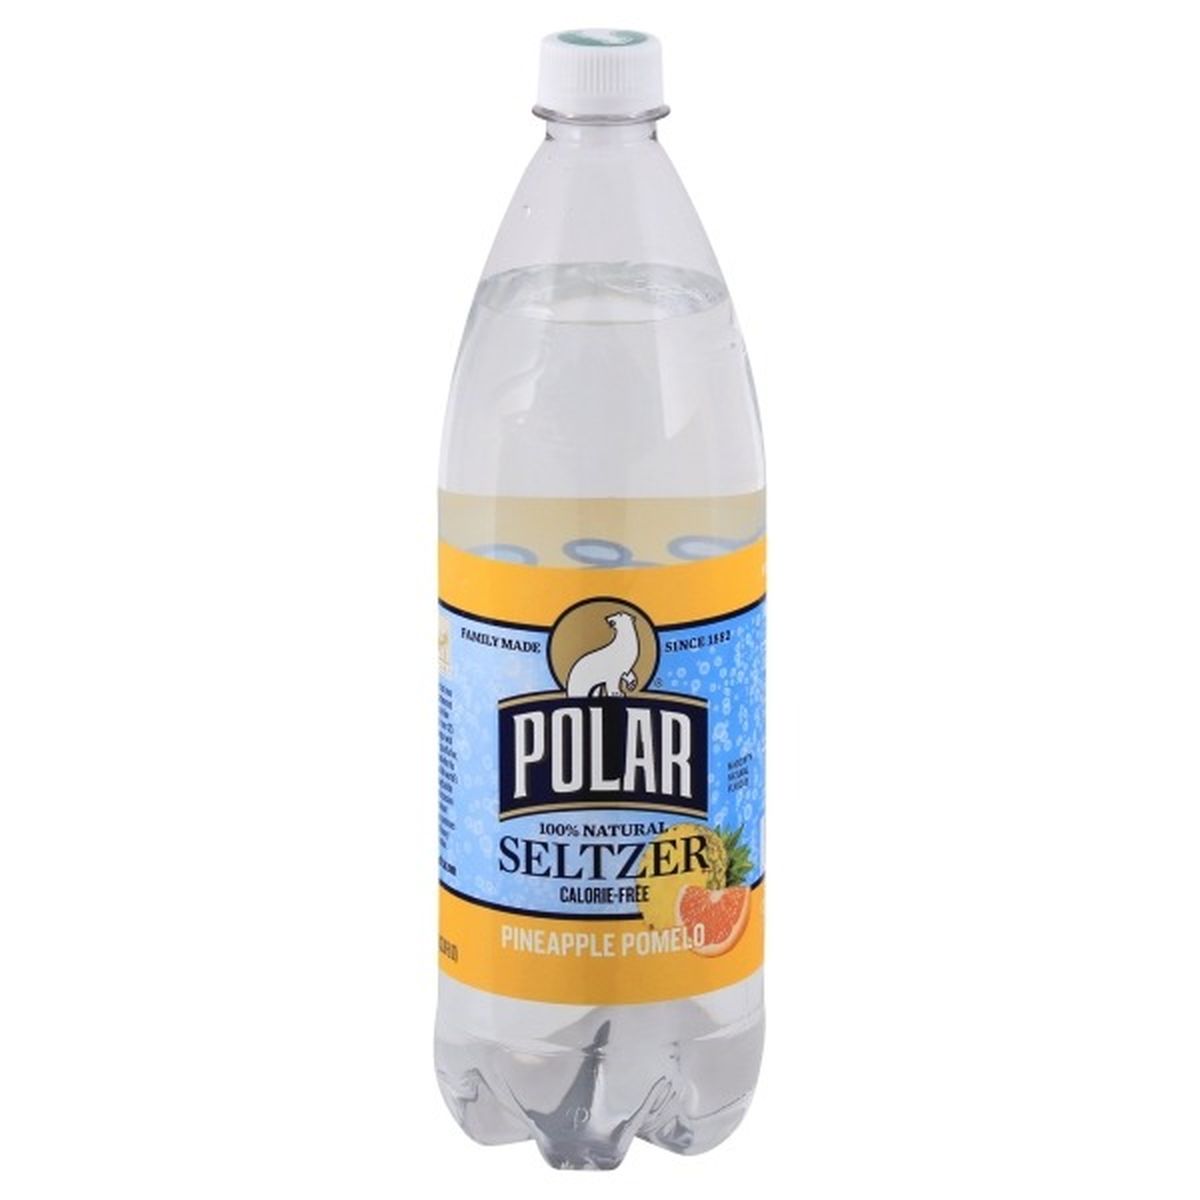 Calories in Polar Seltzer, 100% Natural, Pineapple Pomelo